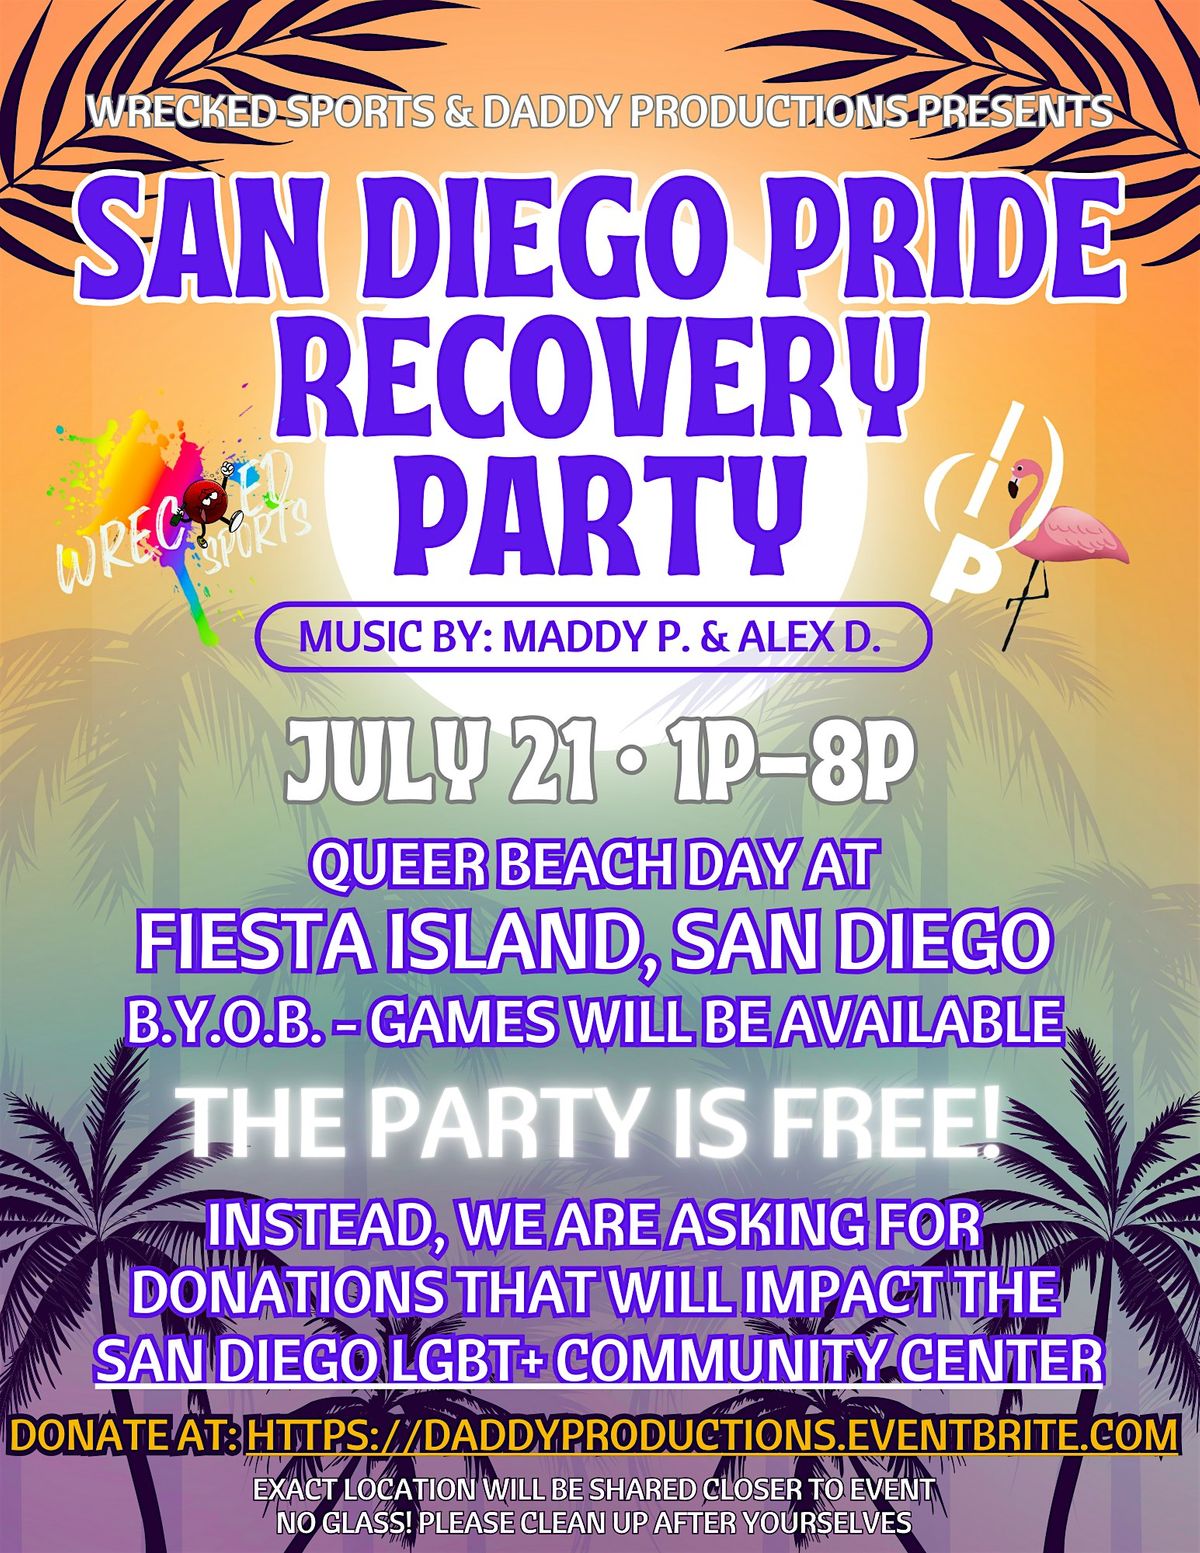 SAN DIEGO PRIDE RECOVERY PARTY